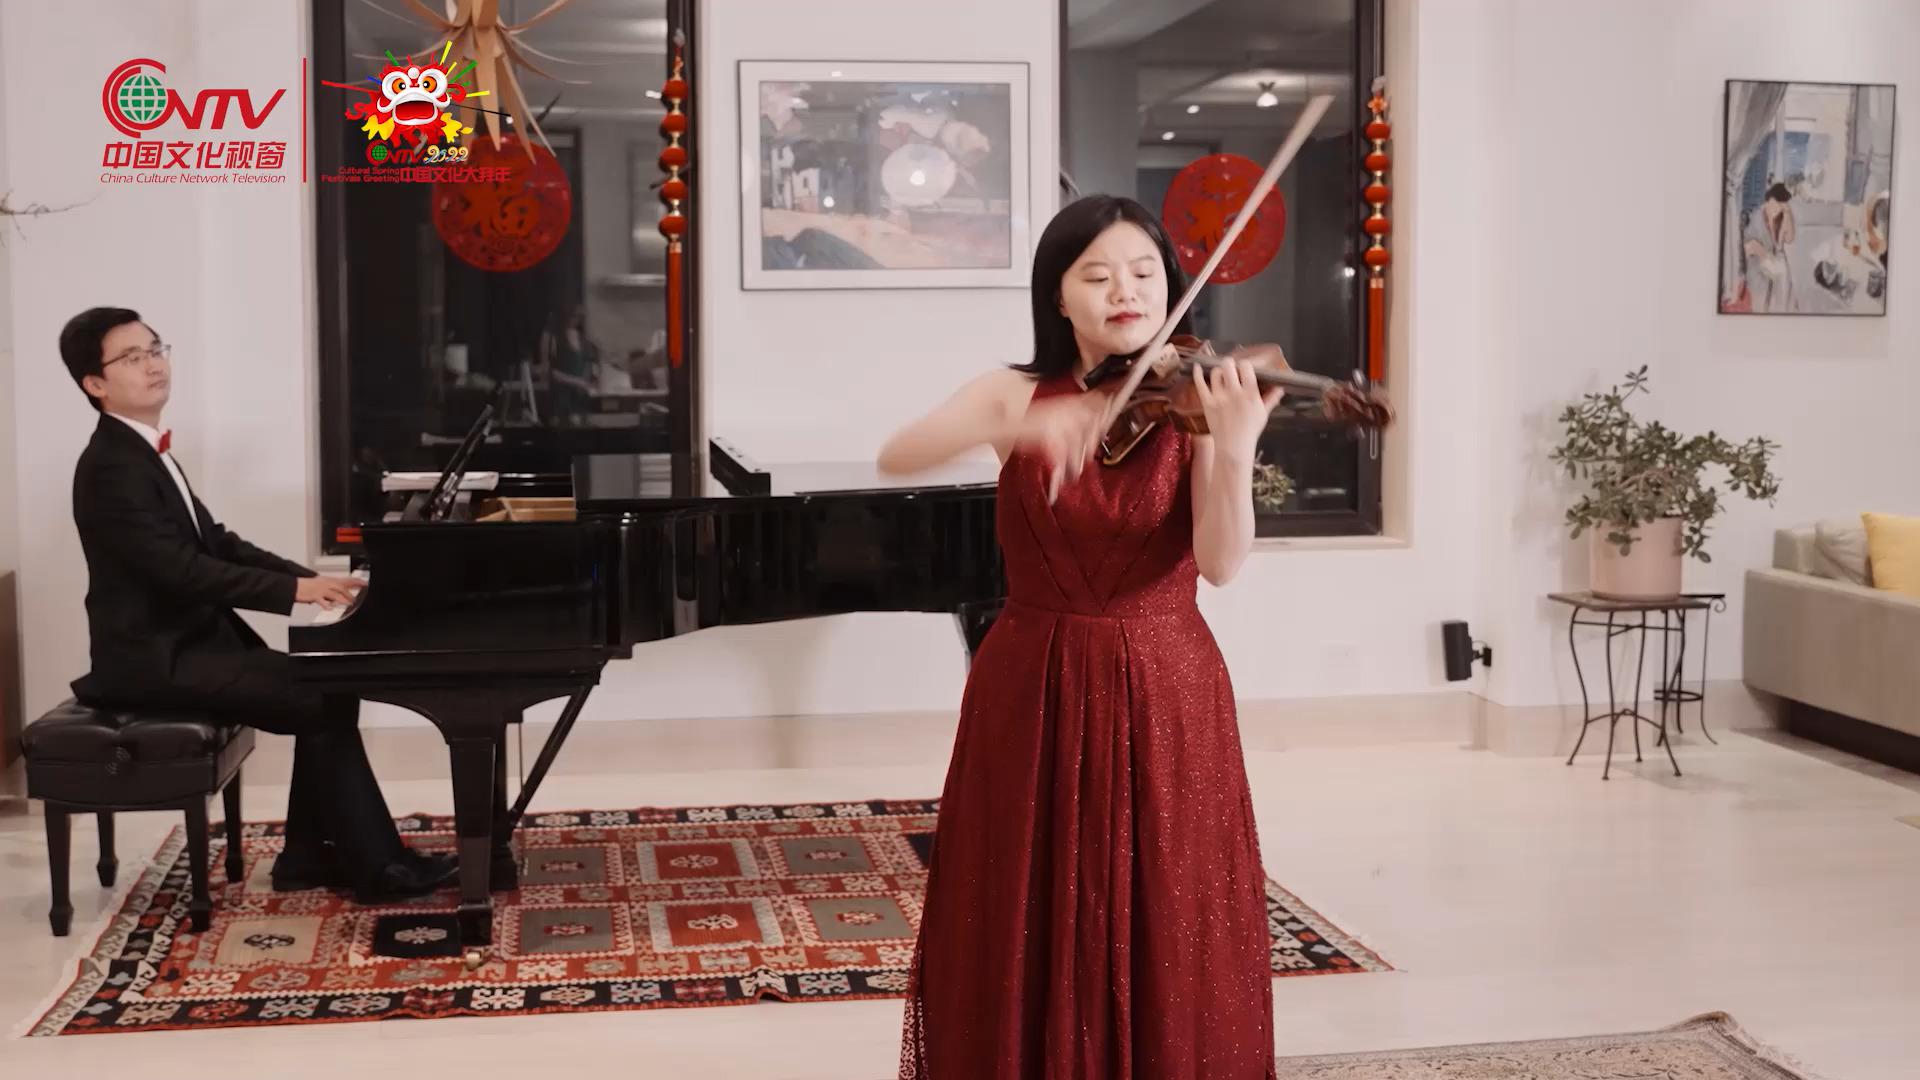 ＂Welcome to the spring world＂ by Liao Peiwen, a soloist of the American Asian Symphony Orchestra